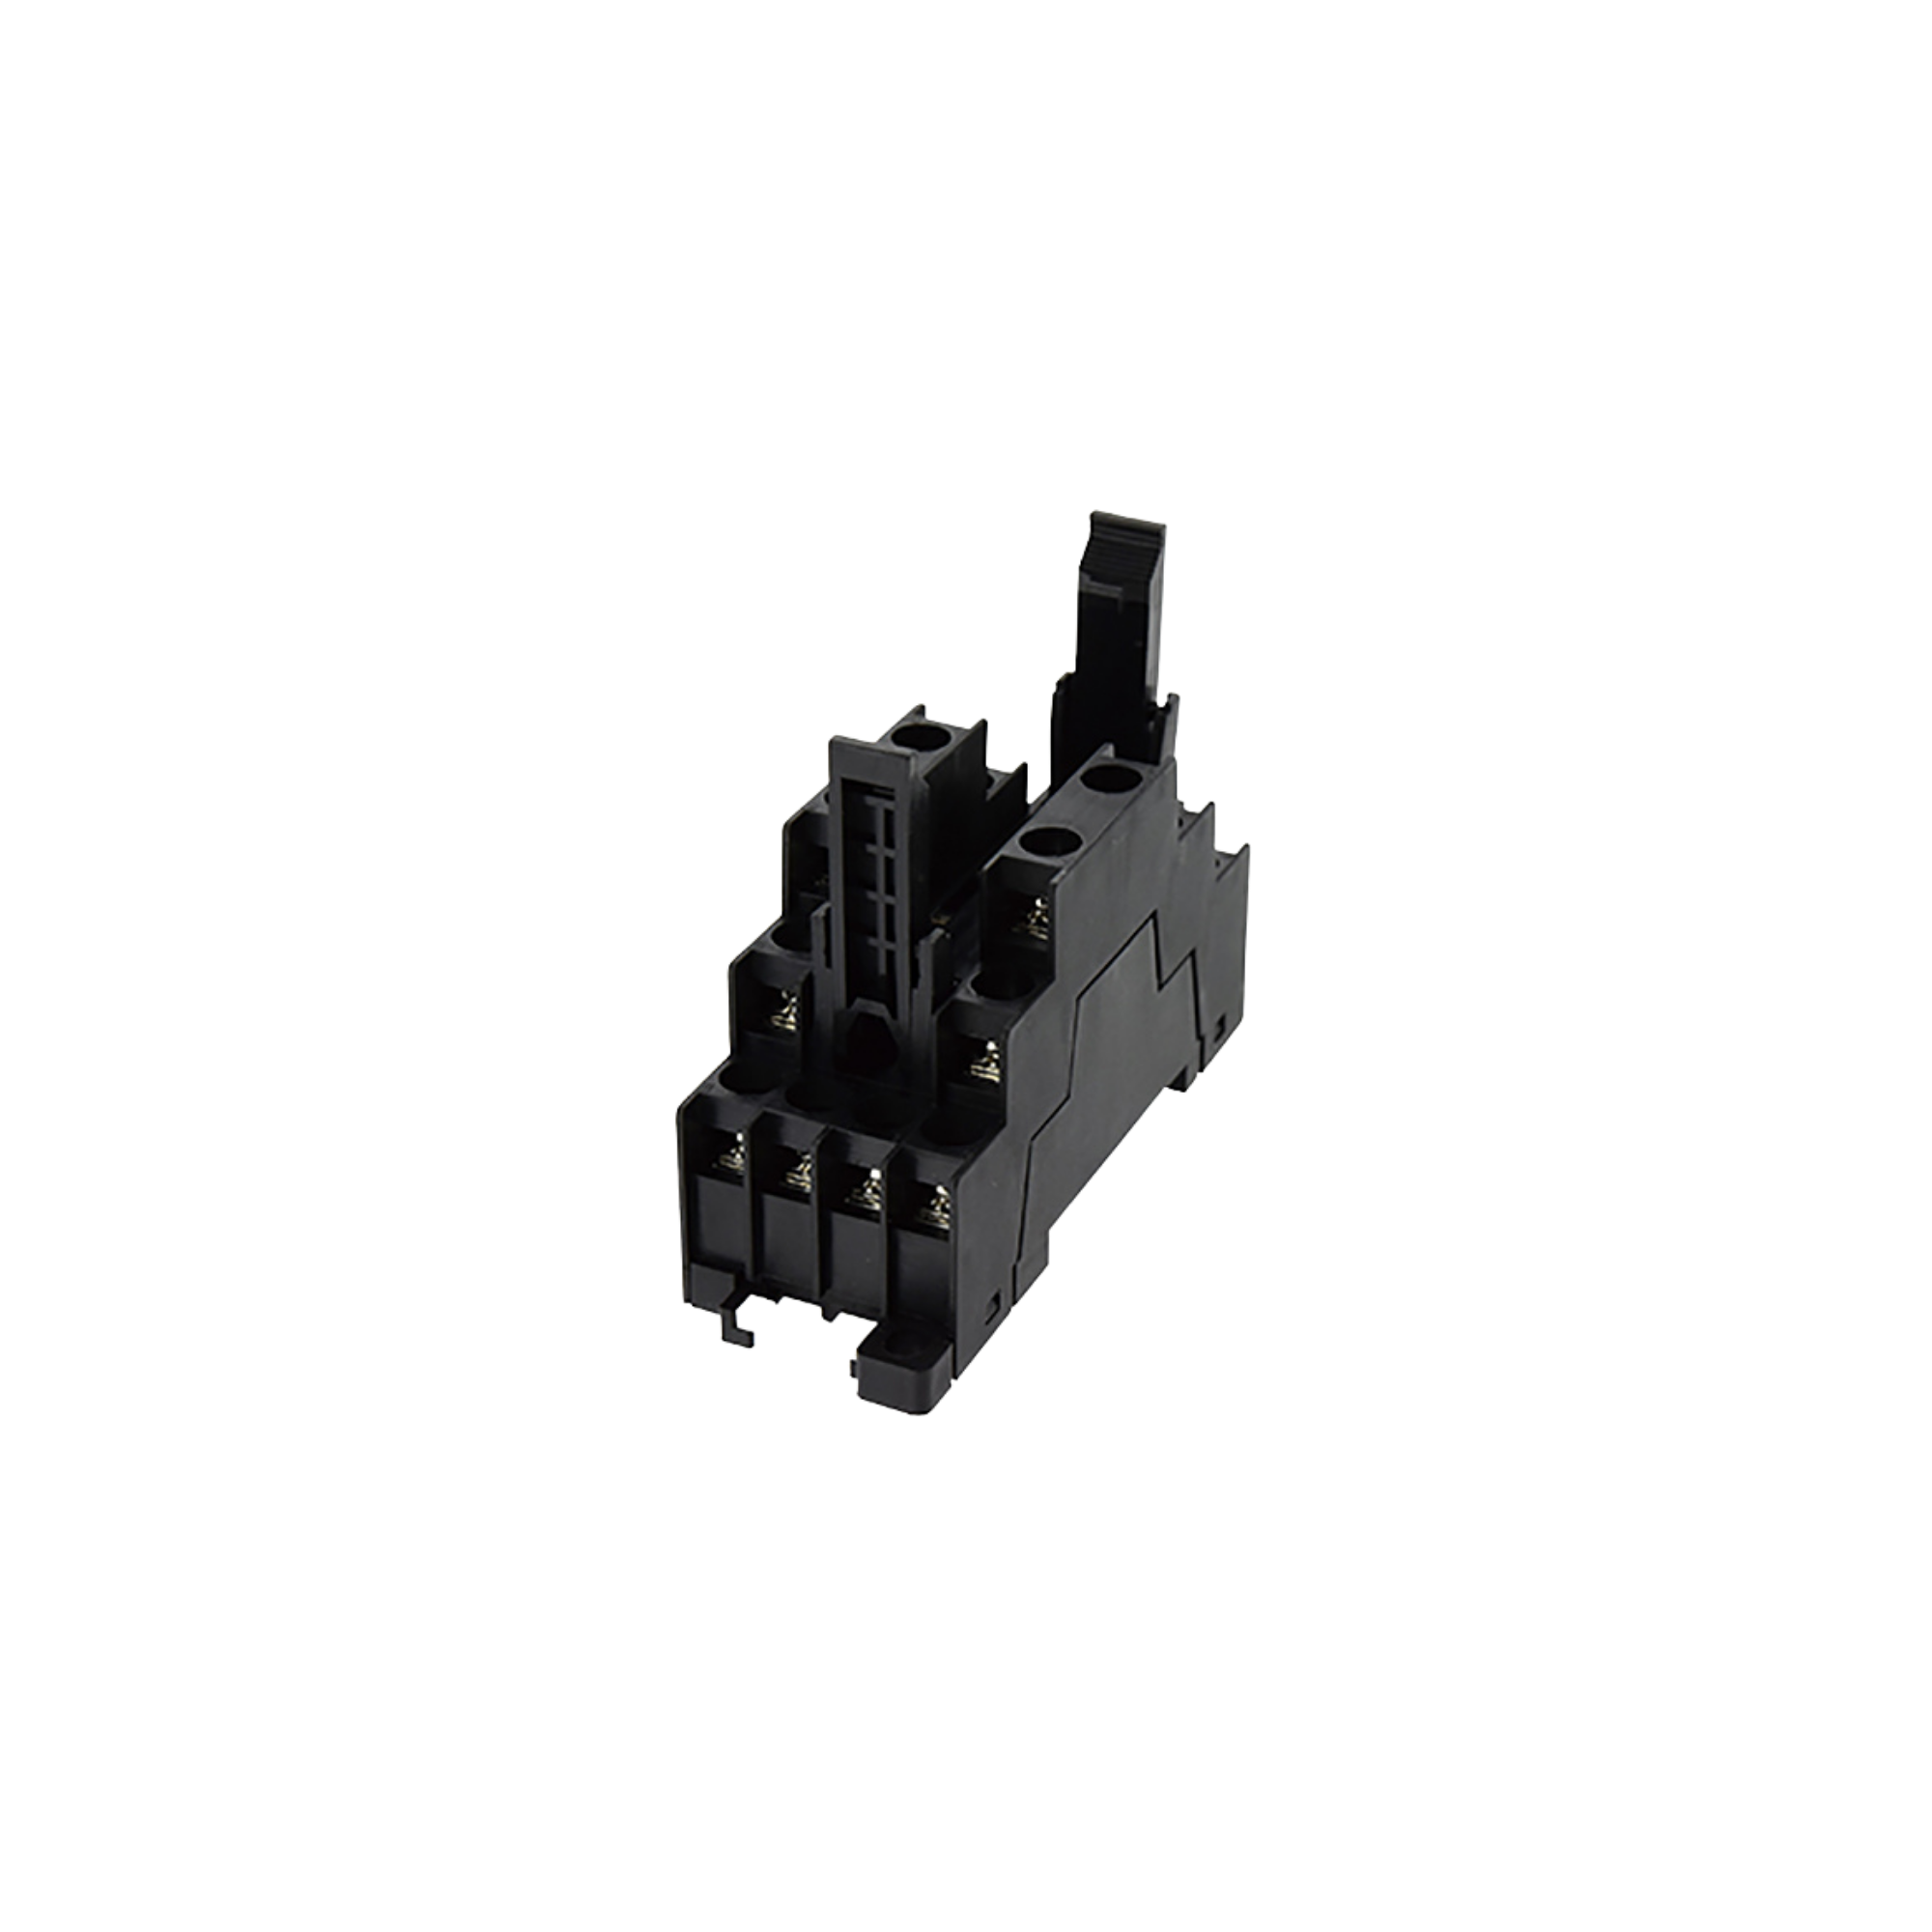 side view of a socket DIN mount with multiple terminal points